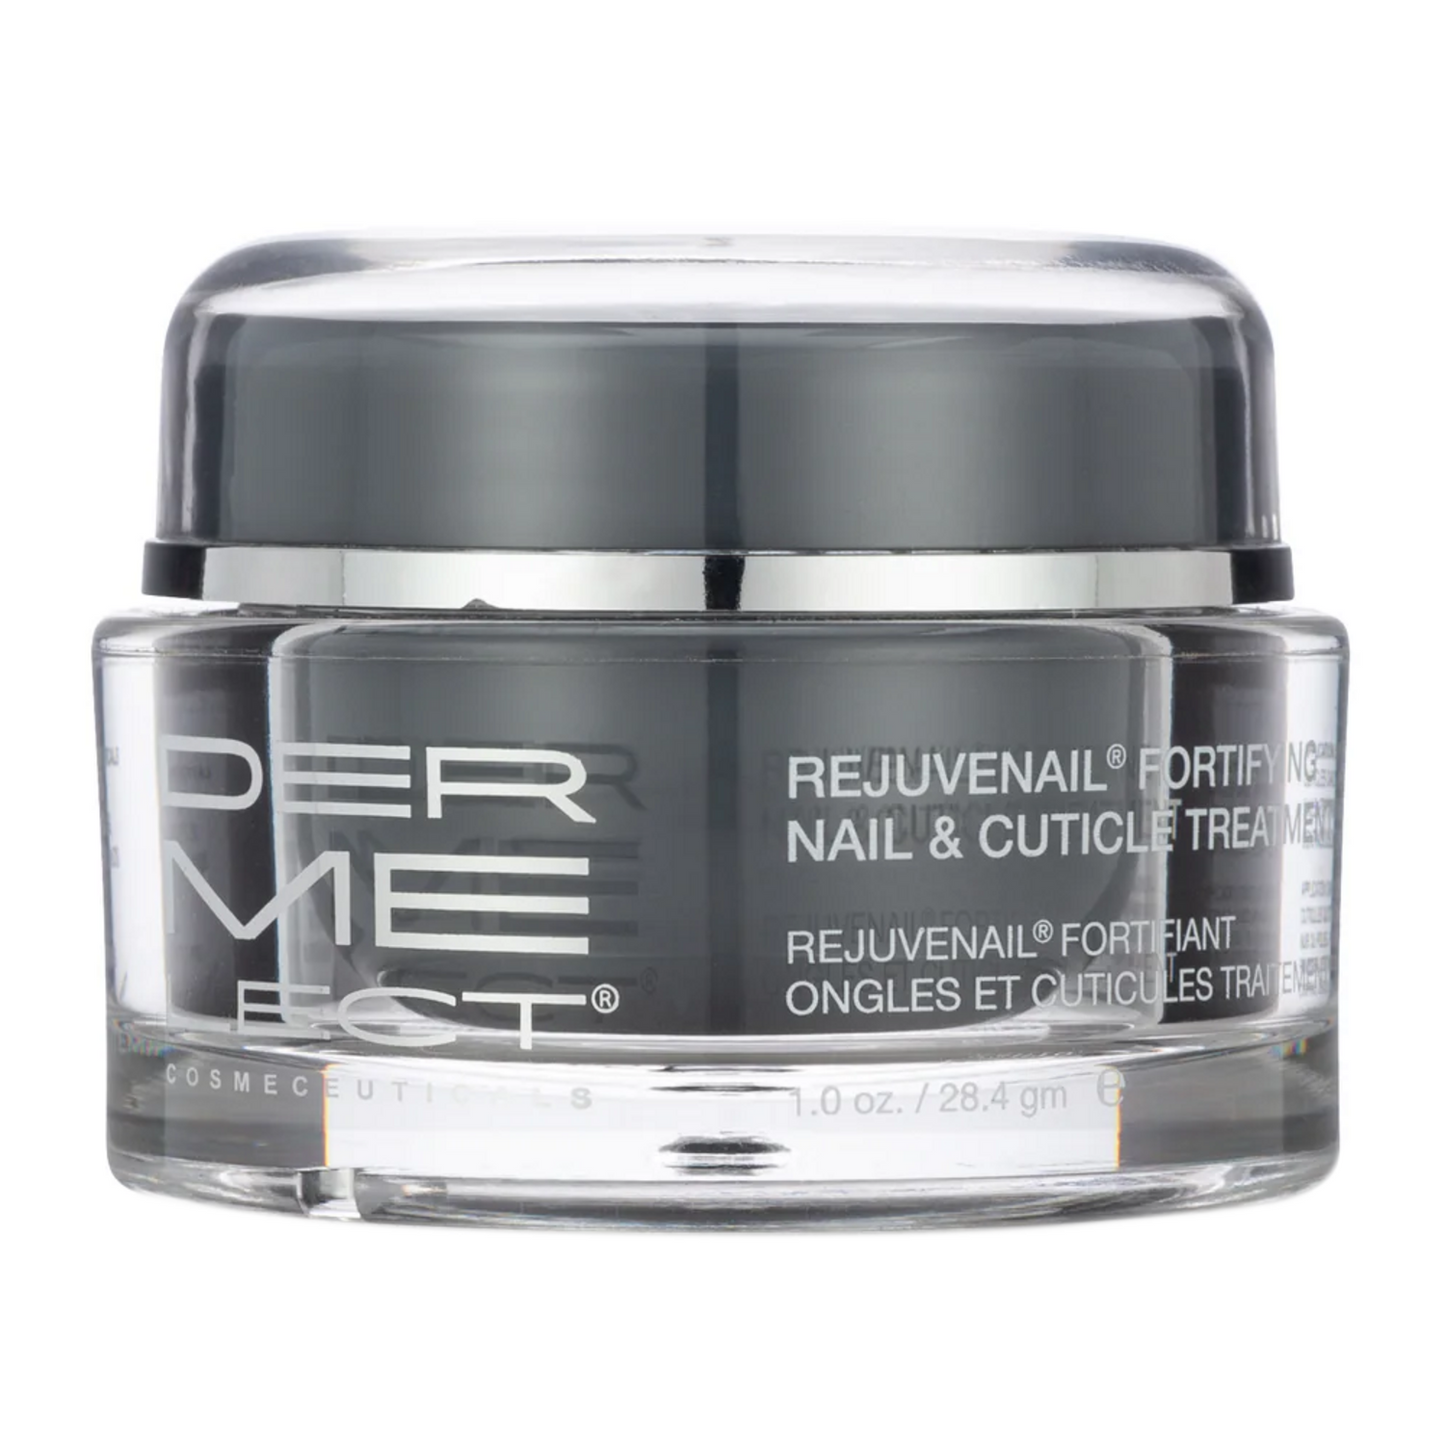 Dermelect Cosmeceuticals Rejuvenail Fortifying Nail and Cuticle Treatment